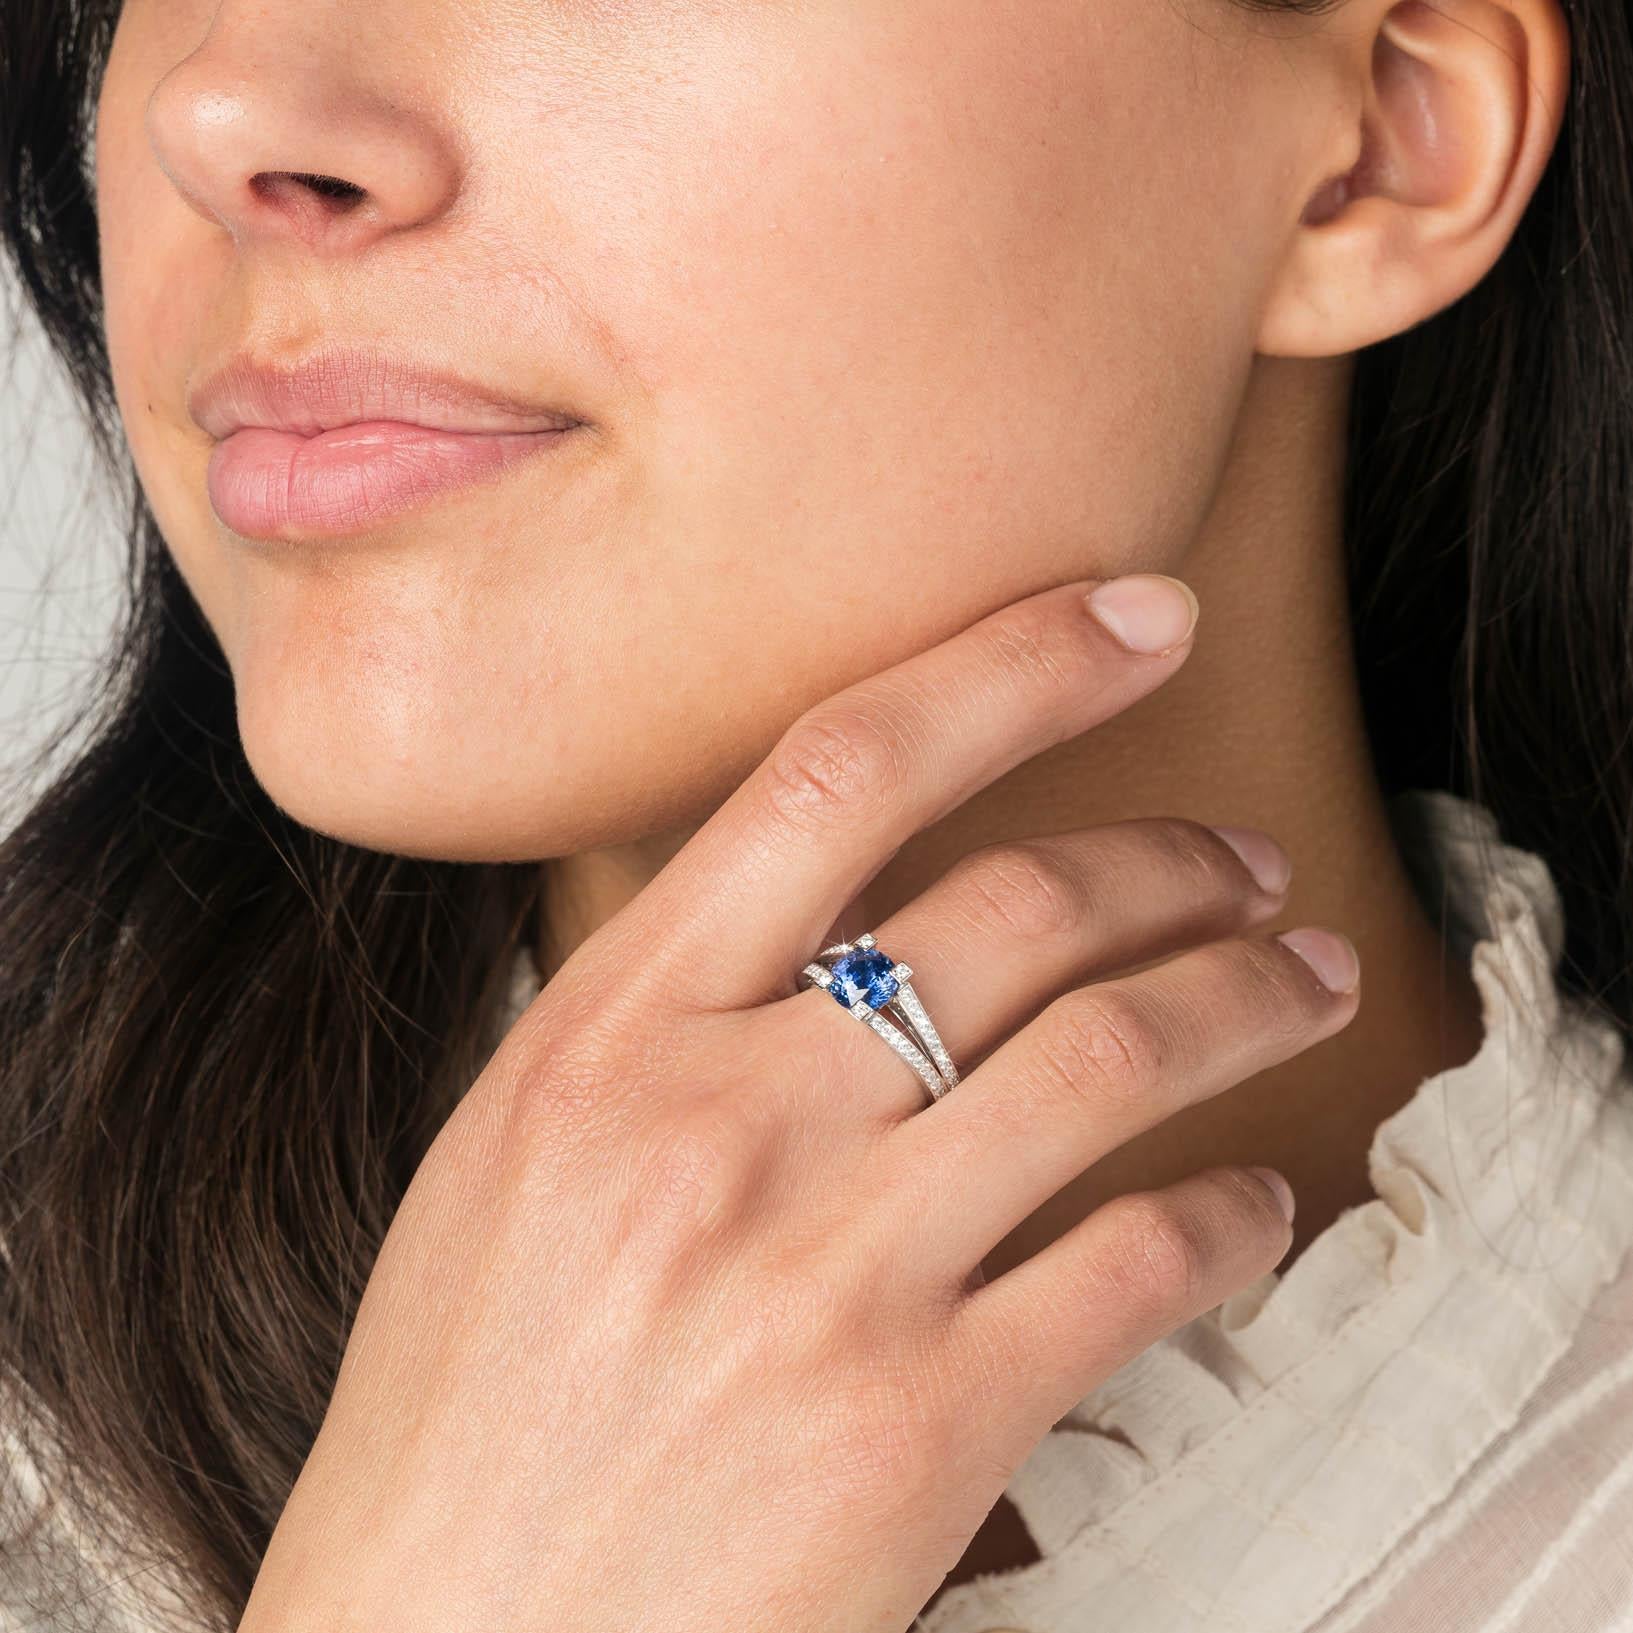 Blue Lady Ring with Sapphire and Brilliant-Cut Diamonds  Cober Jewellery

Exquisite 18K White Gold Ring with Brilliant-Cut Diamonds and Blue Sapphire.
Discover the epitome of elegance and sophistication with our stunning 18K white gold ring from